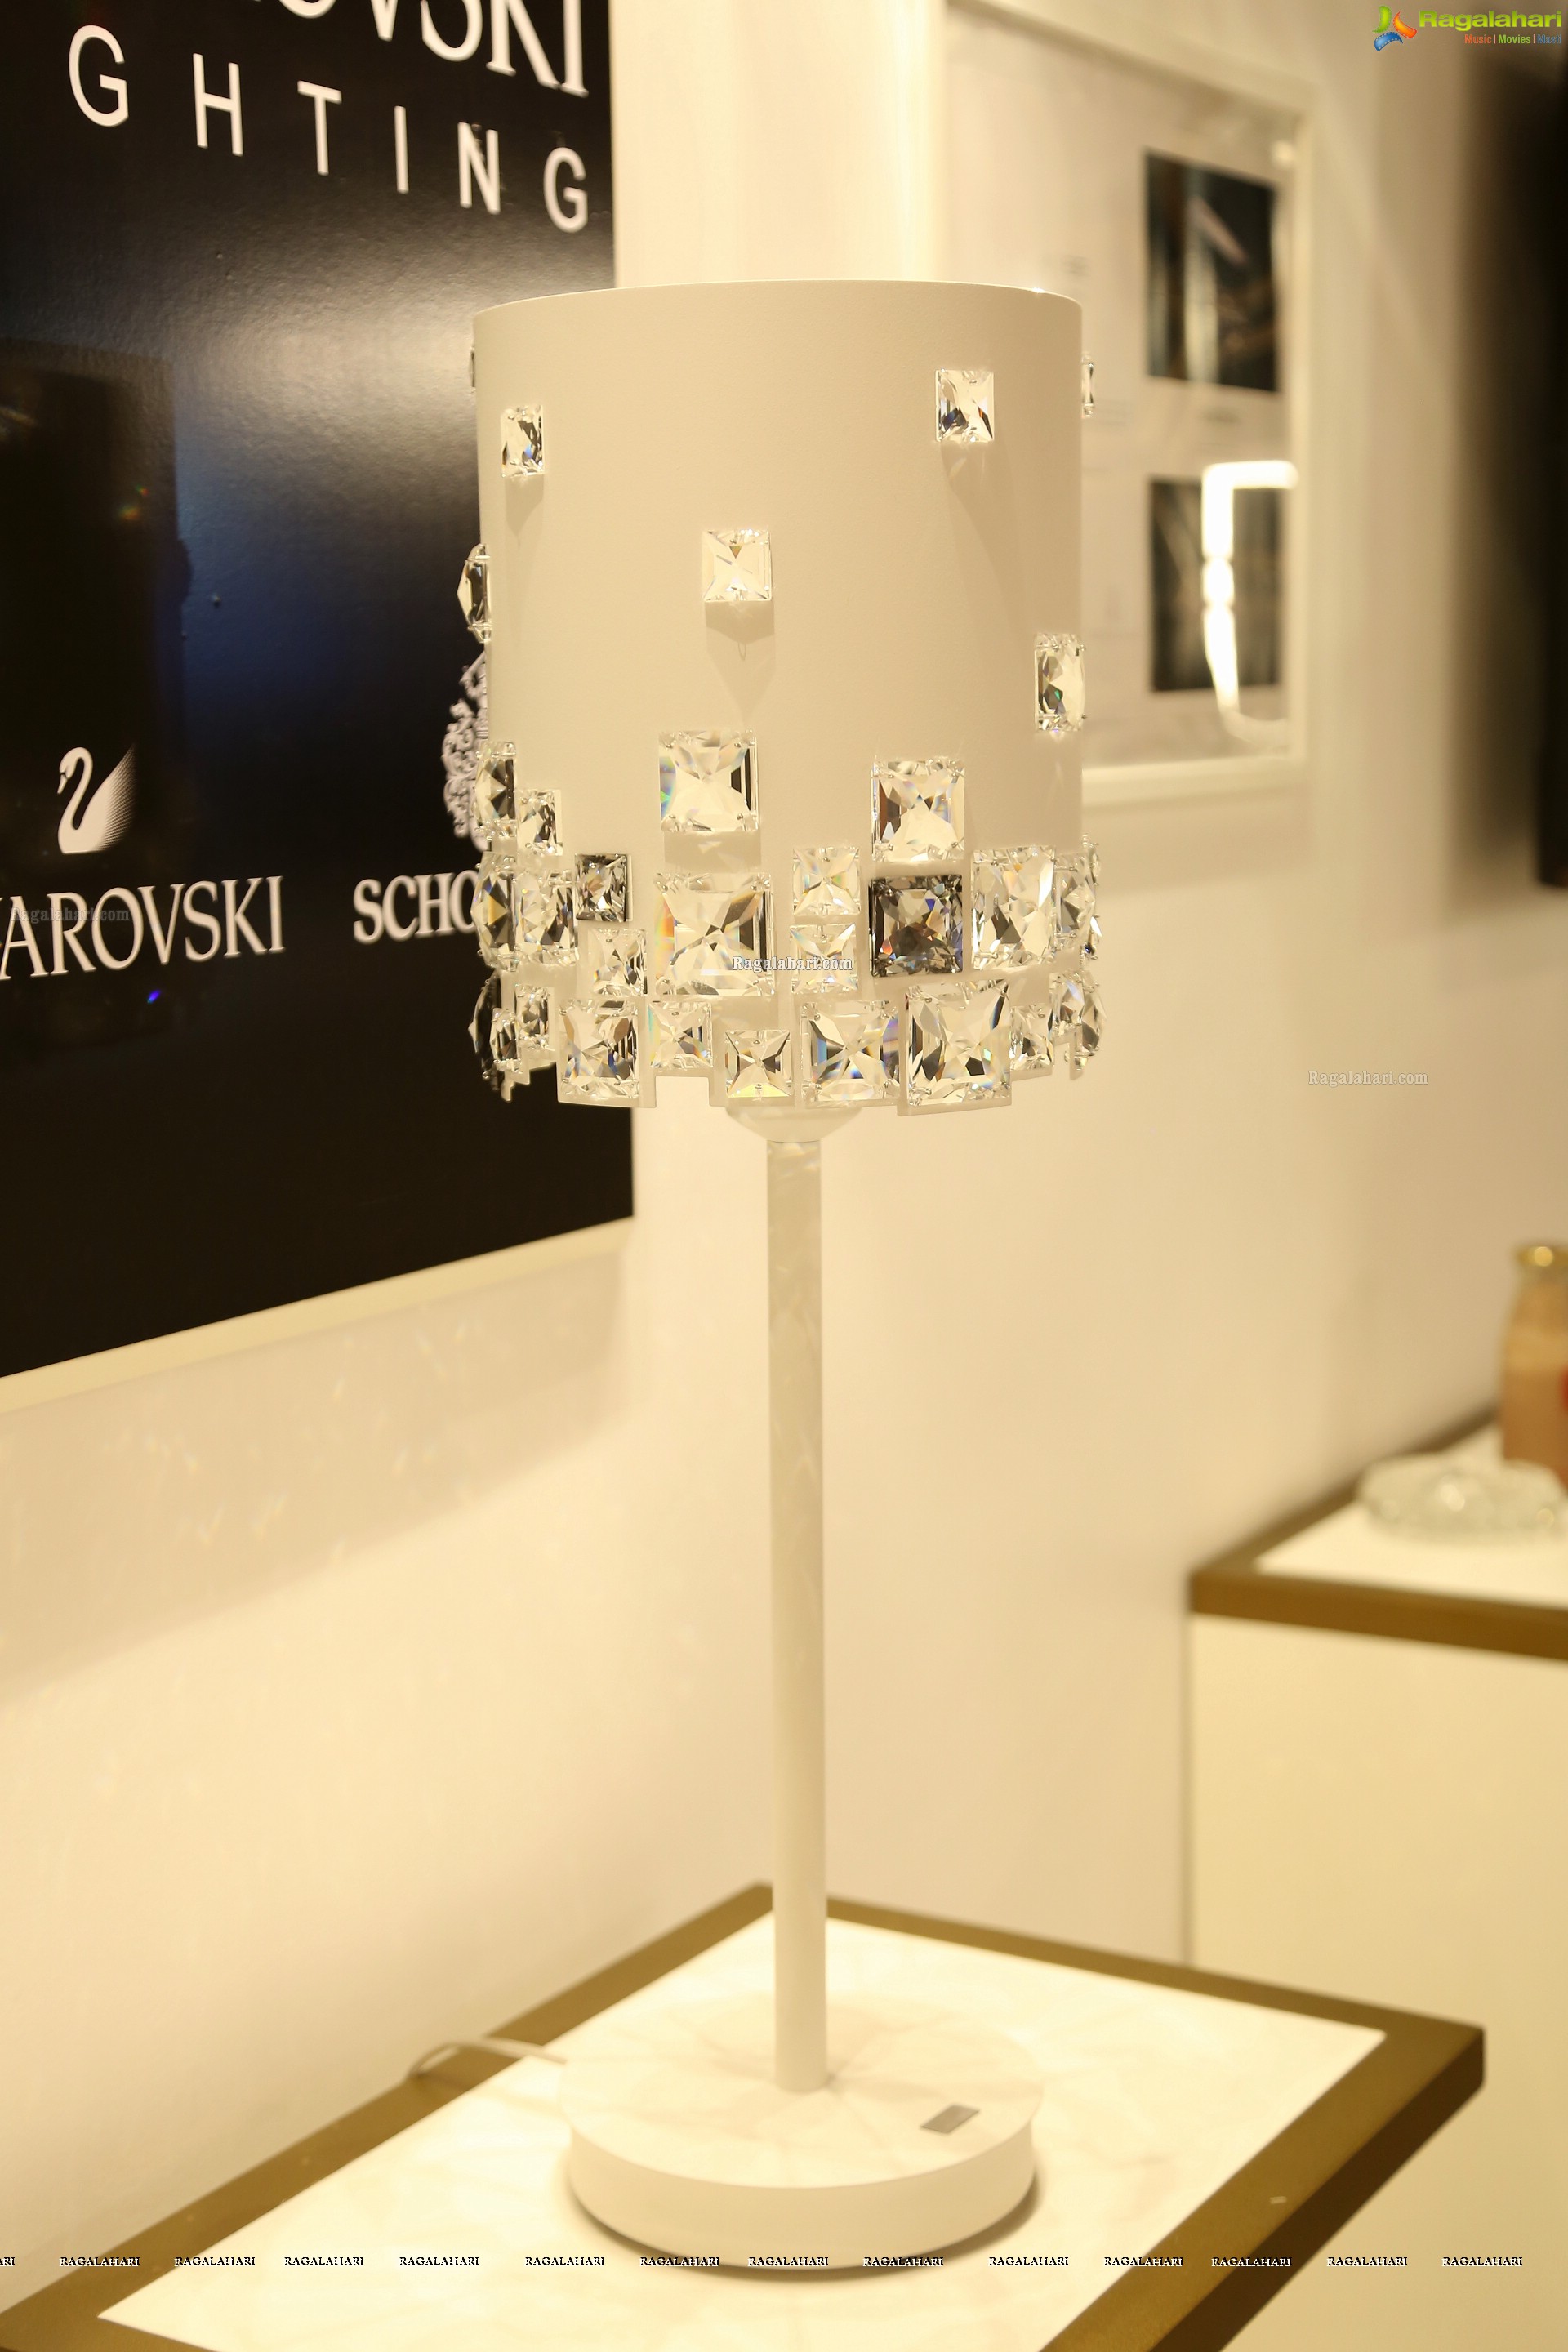 Preview of E'lite Luxury Lighting’s New Lighting Store EGLO [Exclusive]